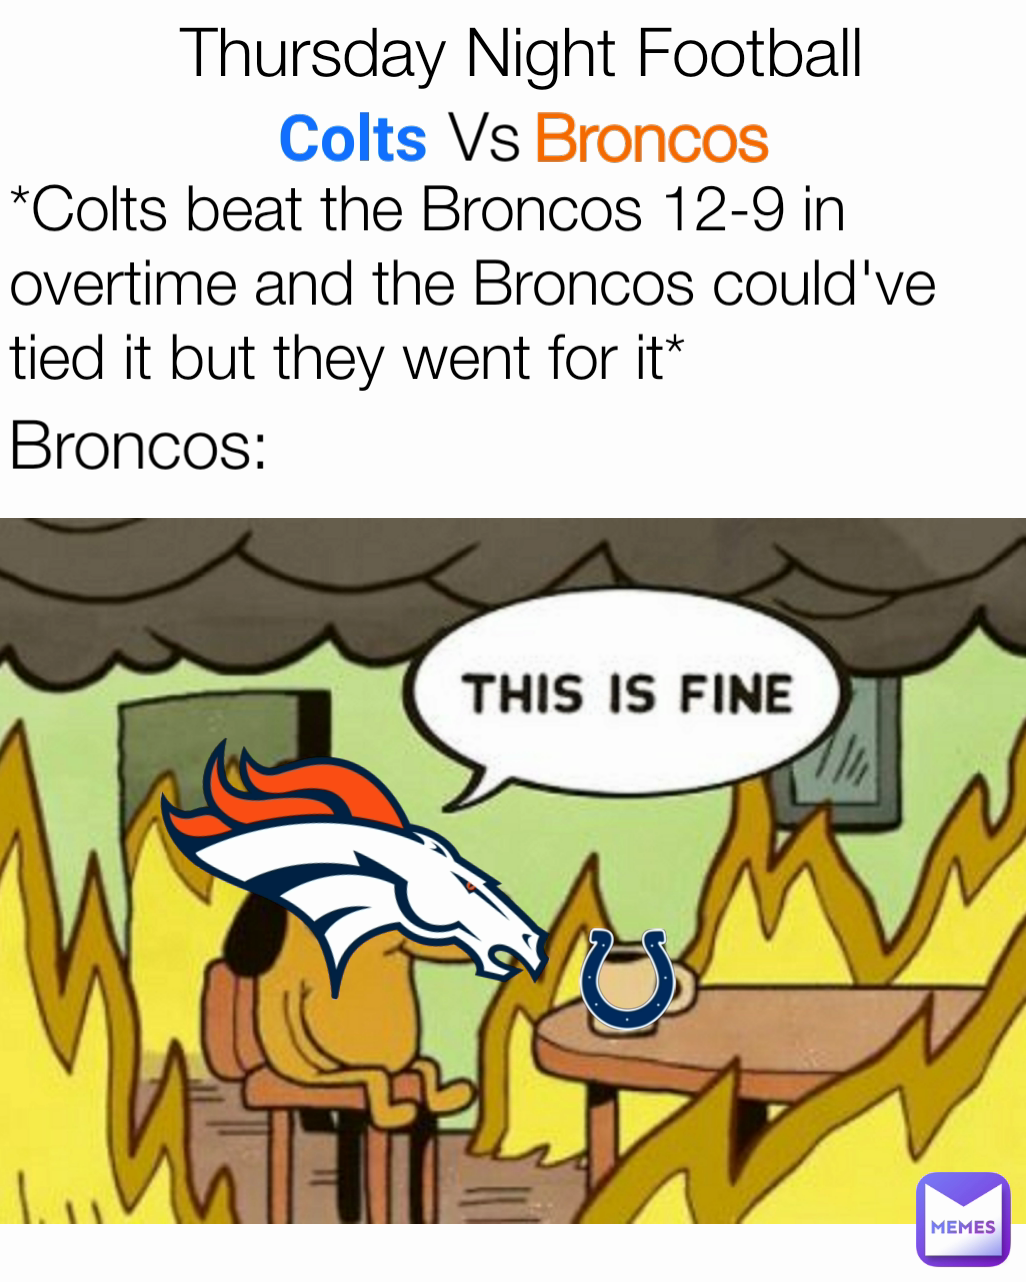 Colts *Colts beat the Broncos 12-9 in overtime and the Broncos could've tied it but they went for it* Thursday Night Football  Broncos  Vs Broncos: